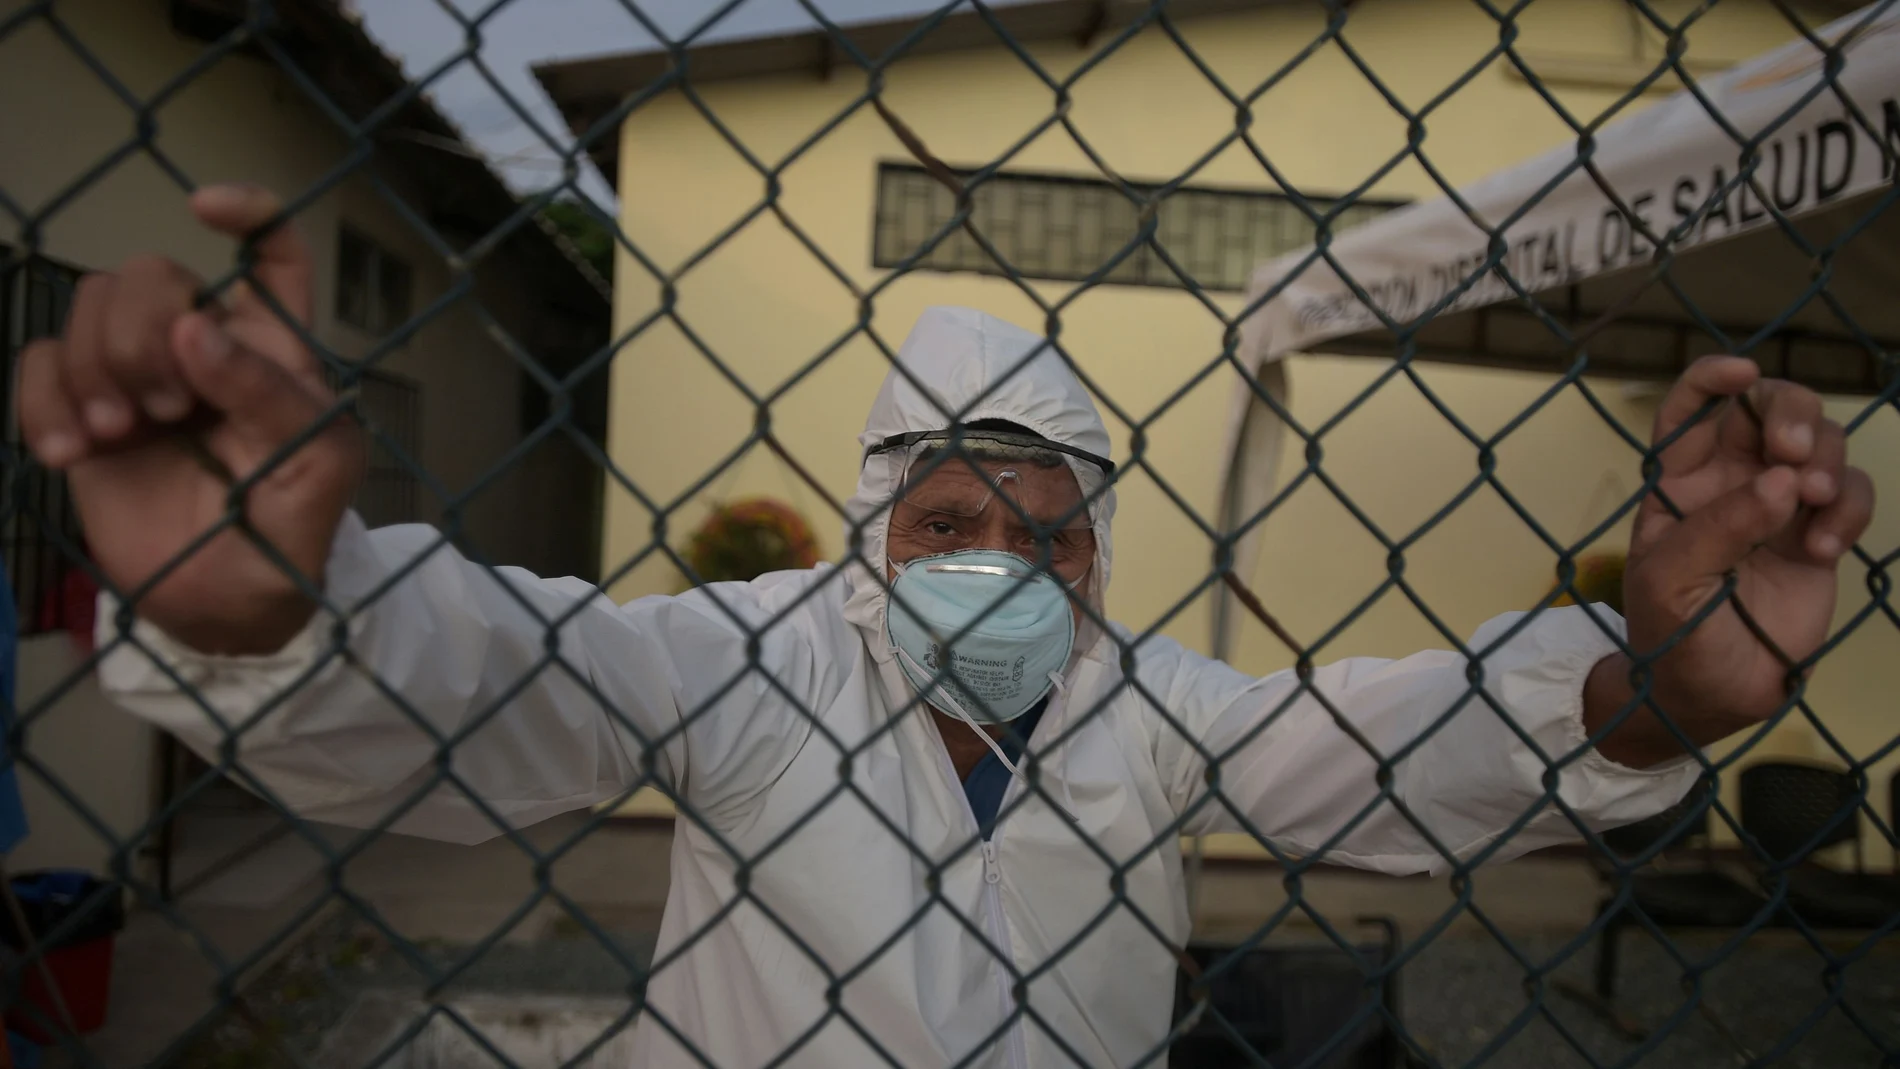 The Wider Image: Rural Ecuador faces coronavirus outbreak without doctors